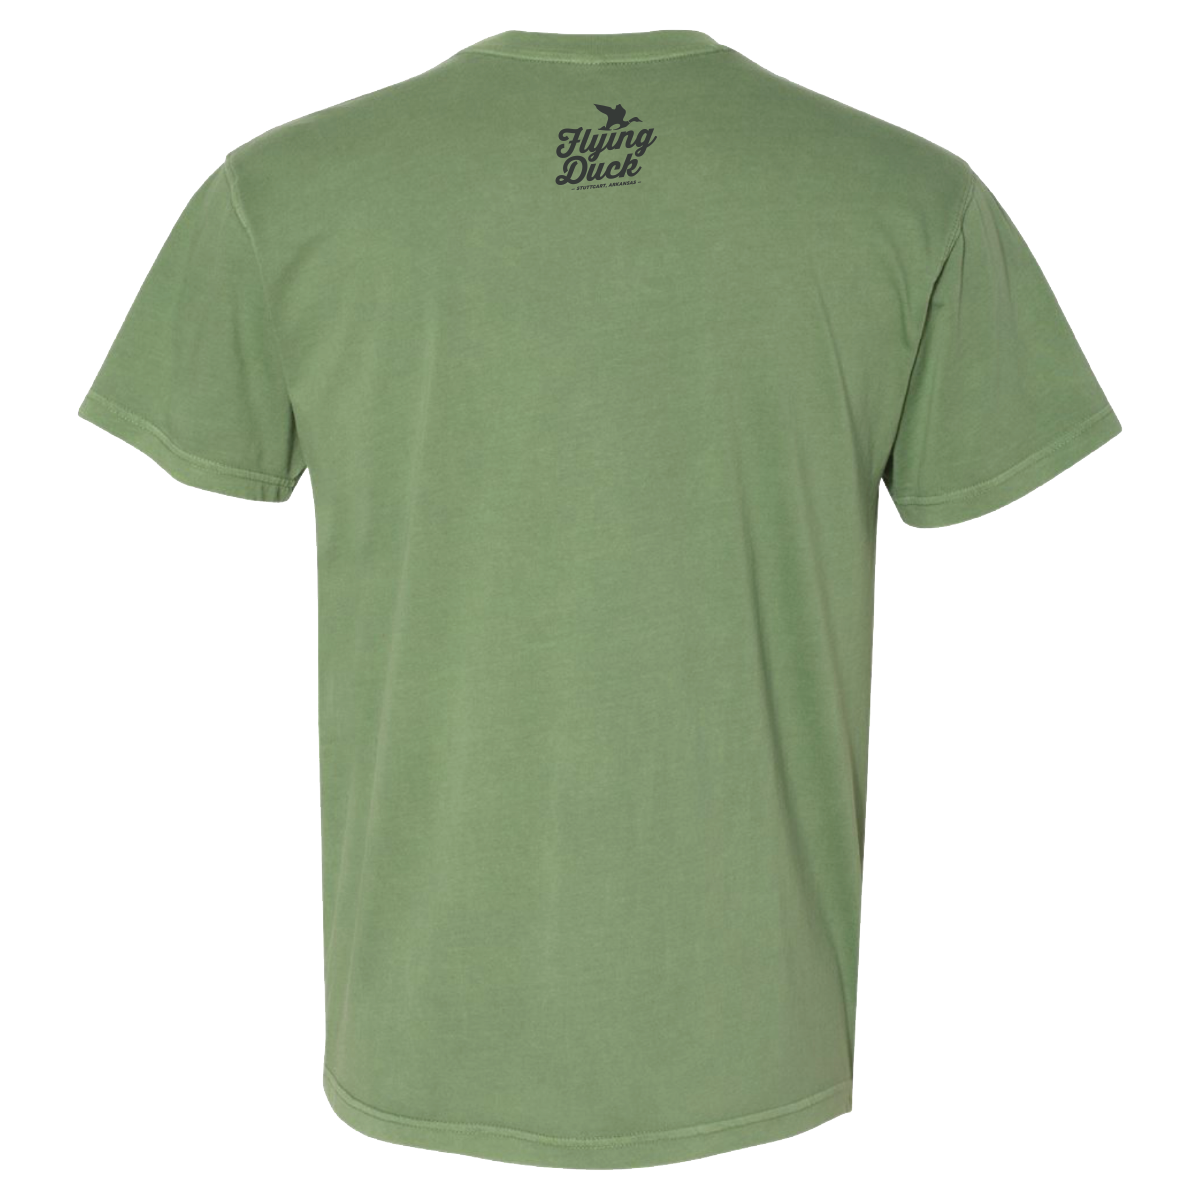 Flying Duck Co. Taproom T-Shirt - NEW